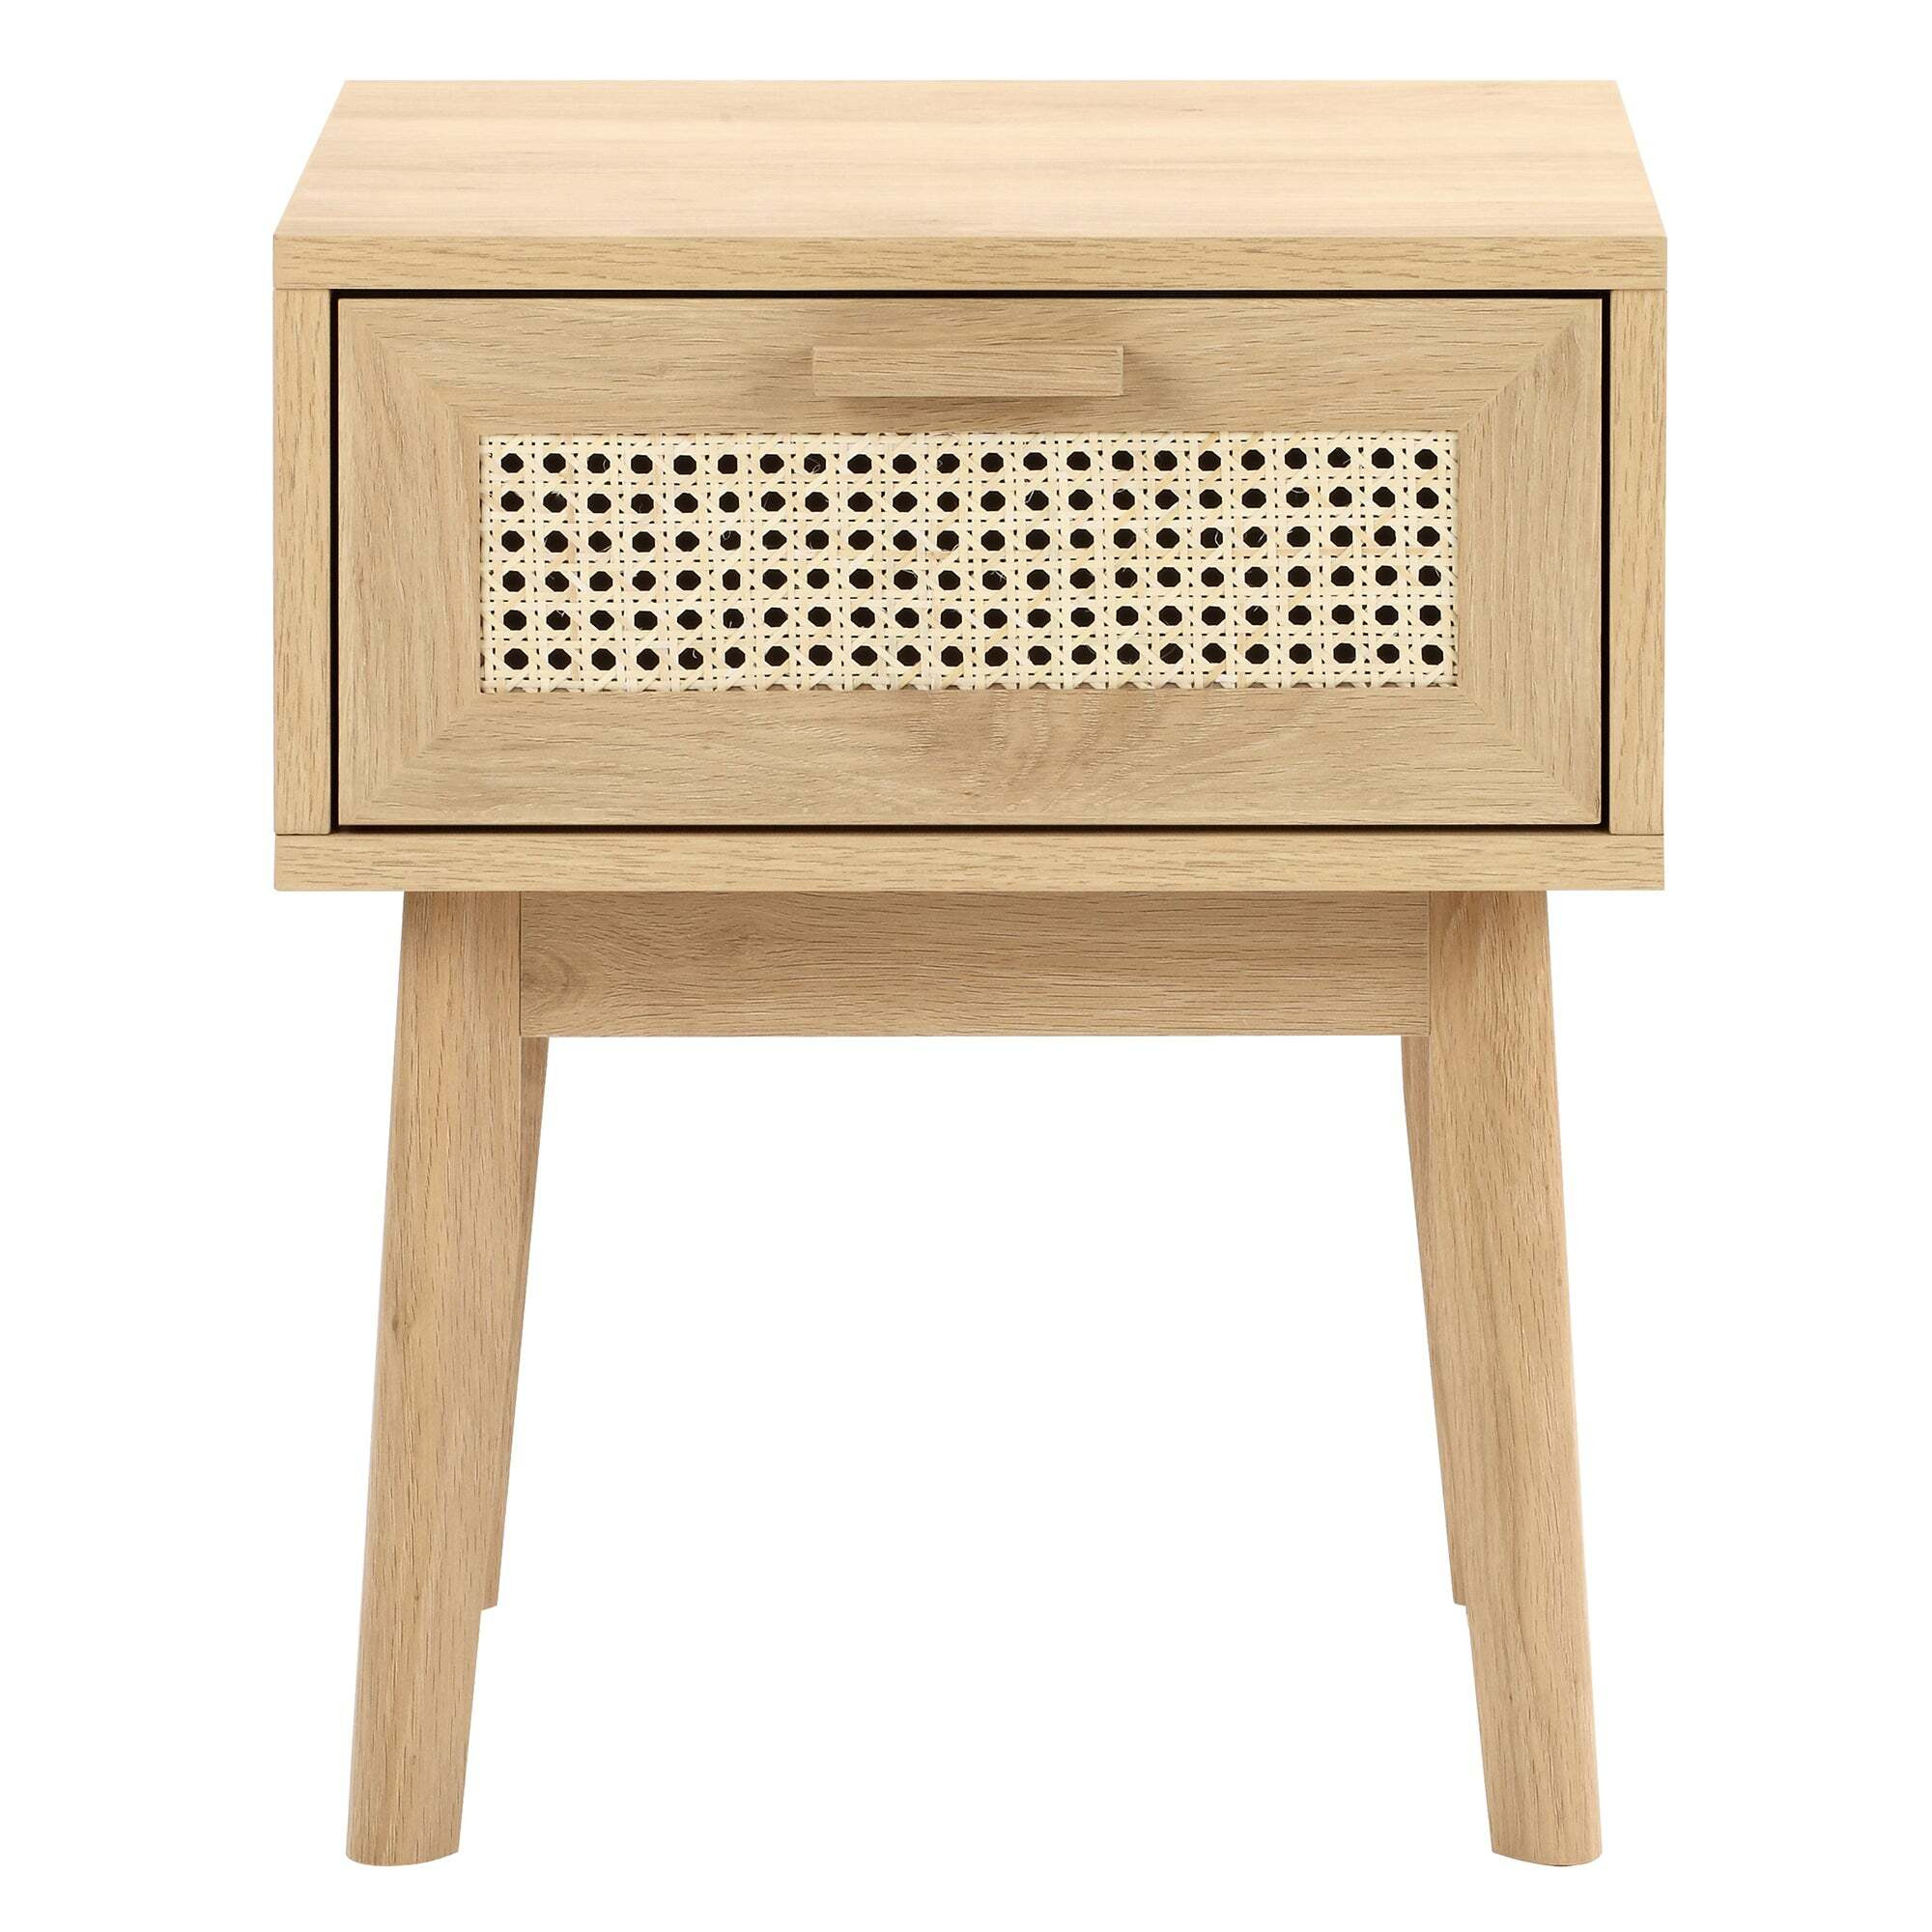 Teddy's Collection Java 1 Drawer Lamp Table - image 1